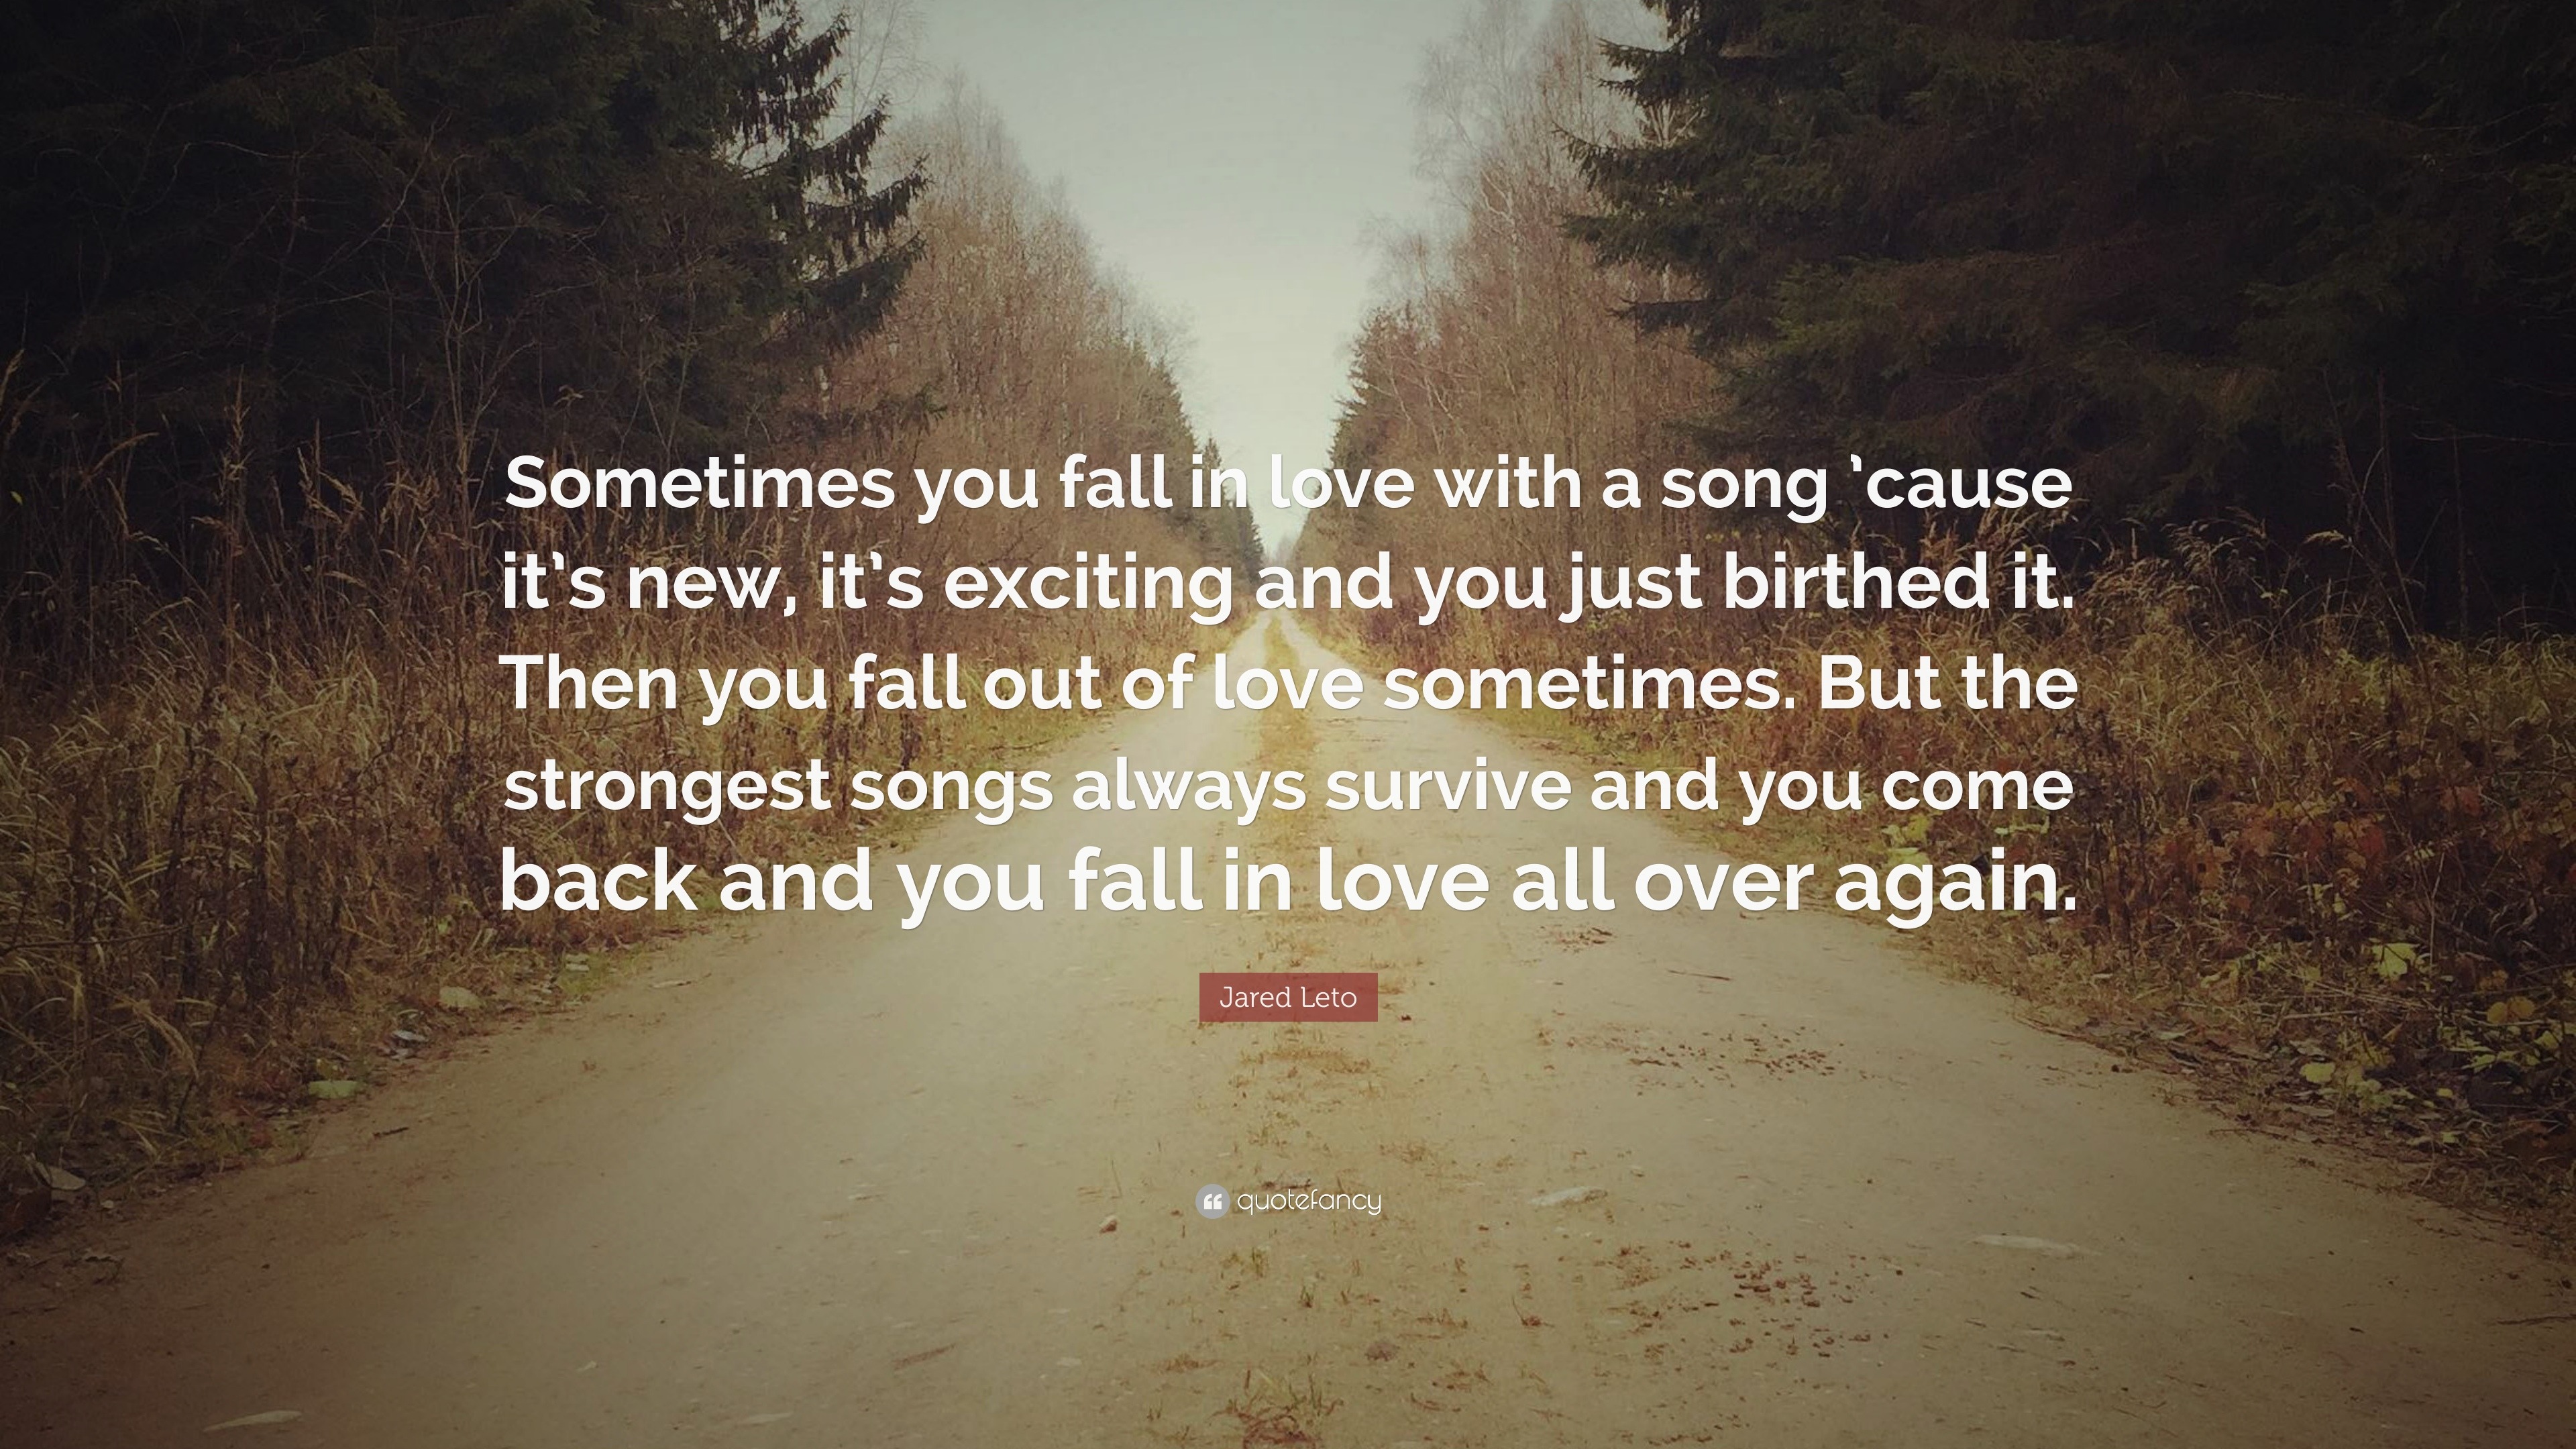 Jared Leto Quote “Sometimes you fall in love with a song cause it s